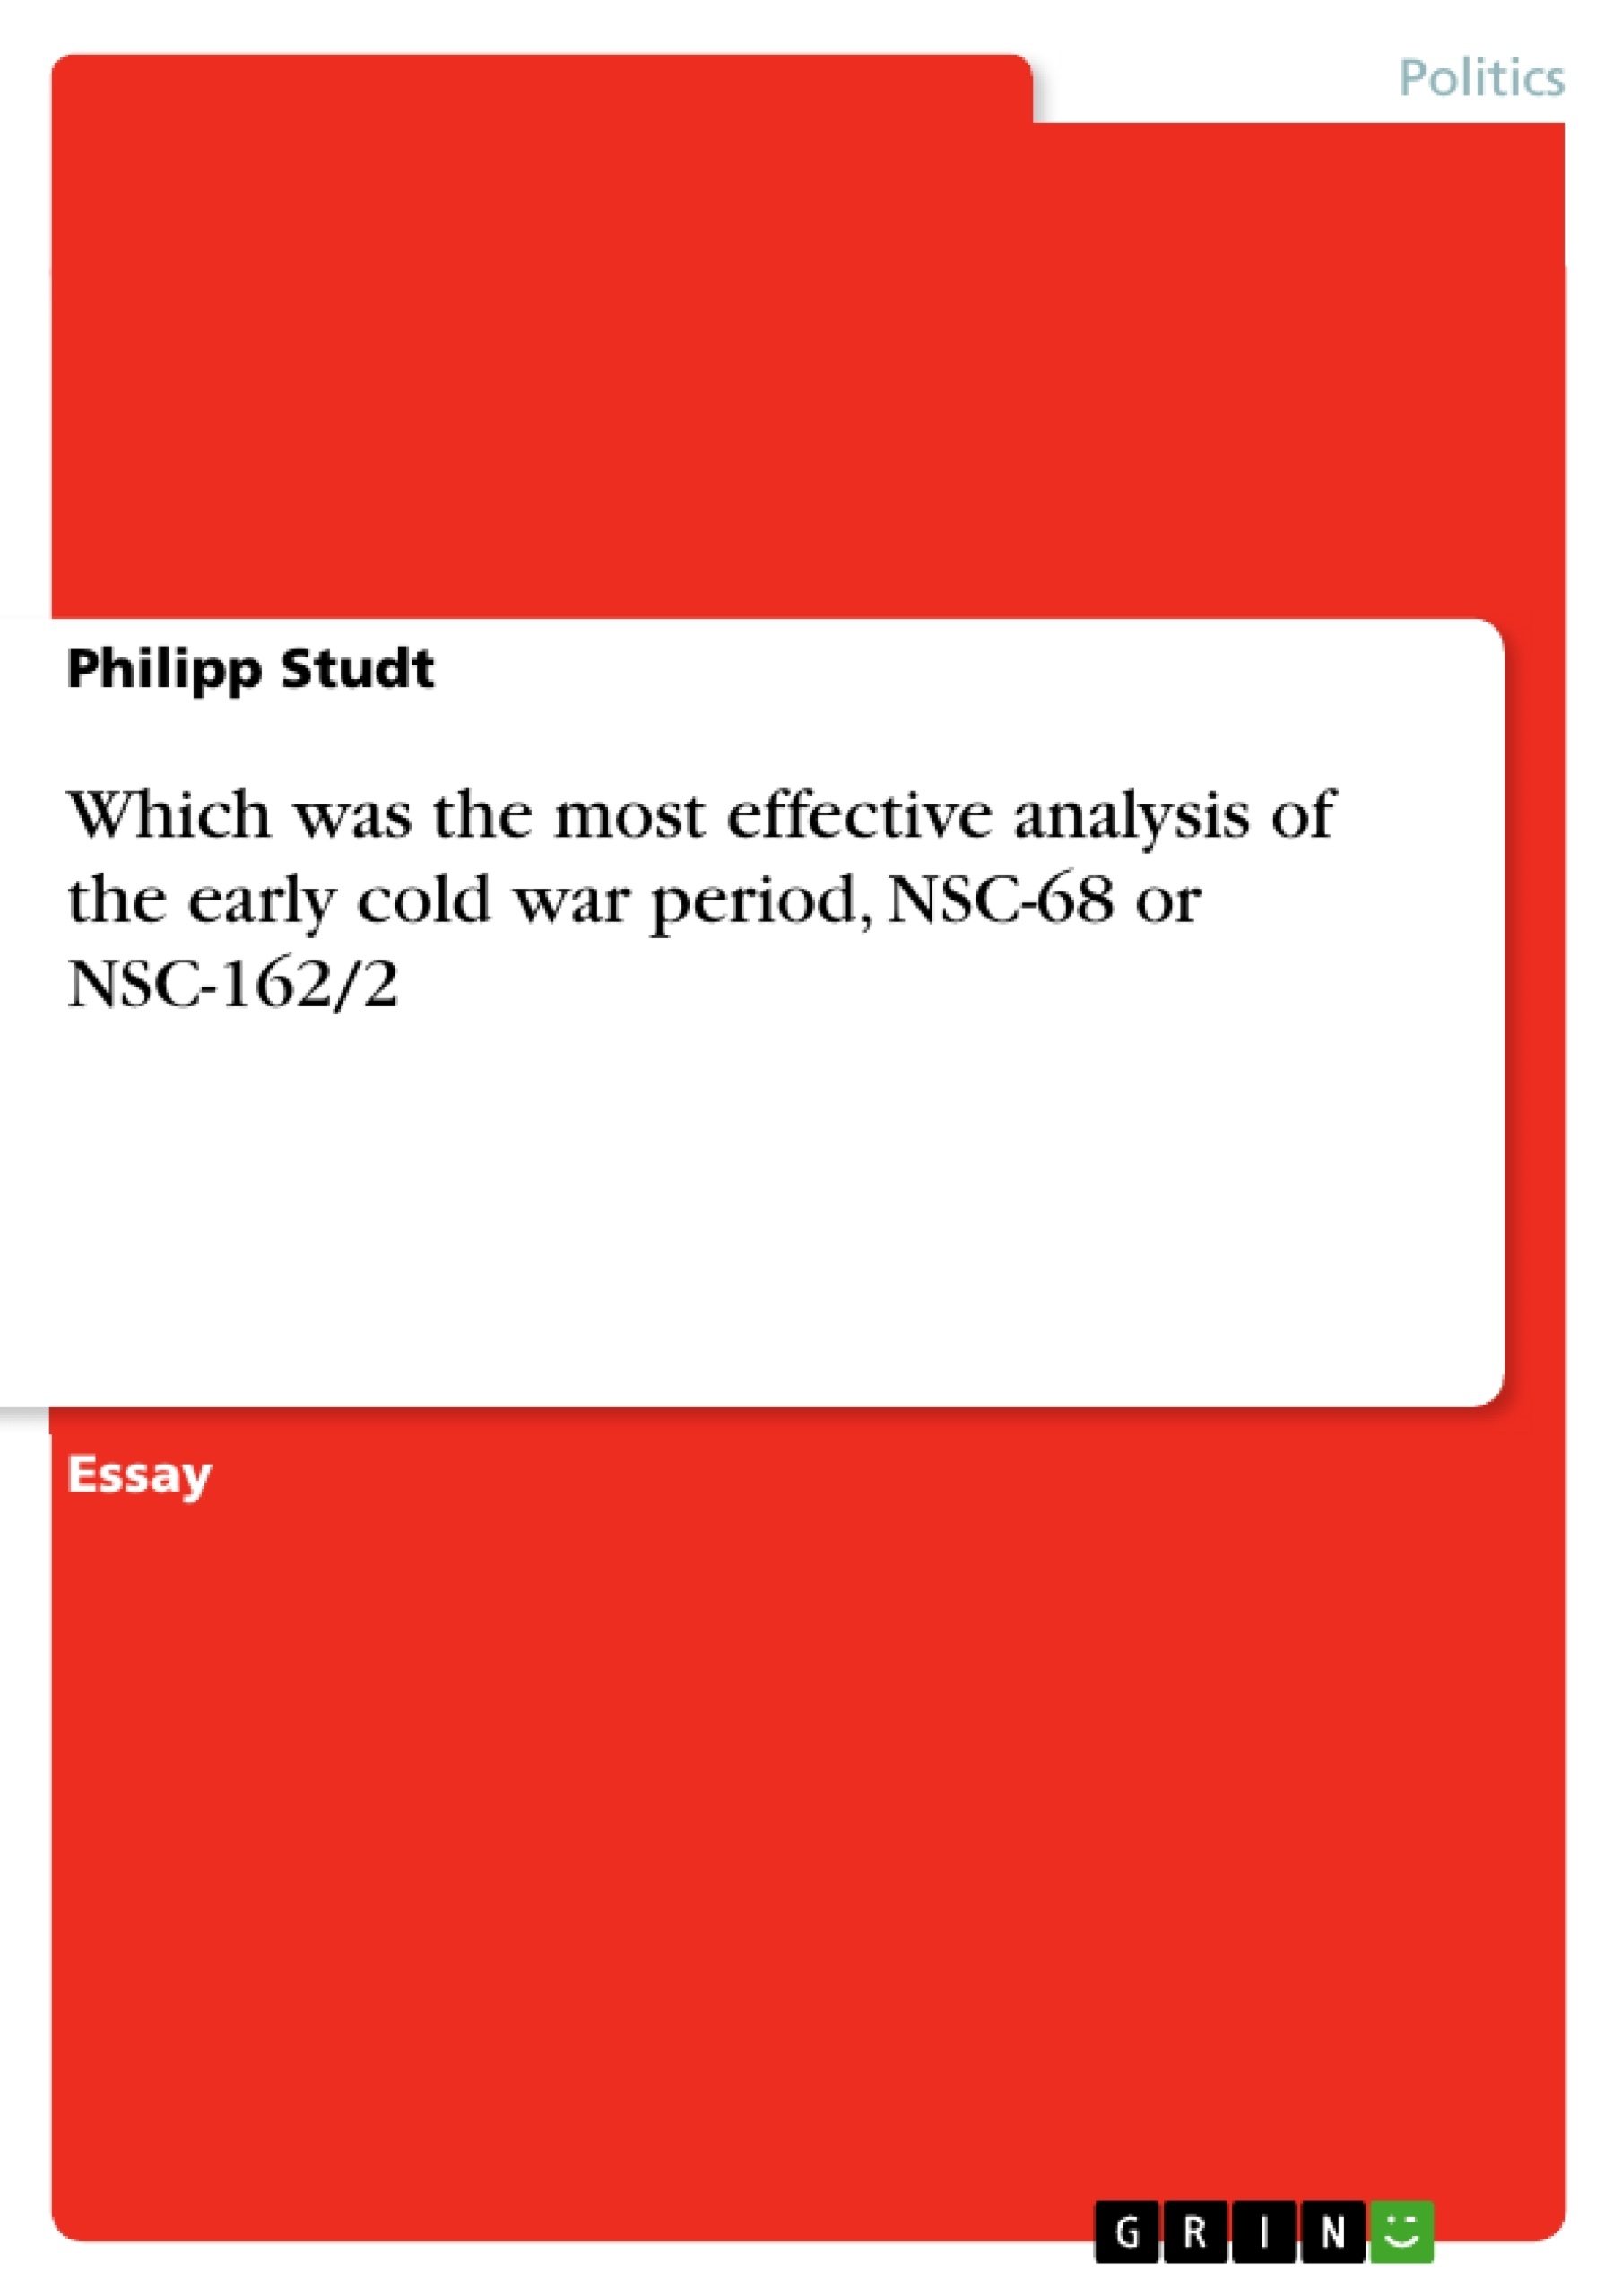 Título: Which was the most effective analysis of the early cold war period, NSC-68 or NSC-162/2